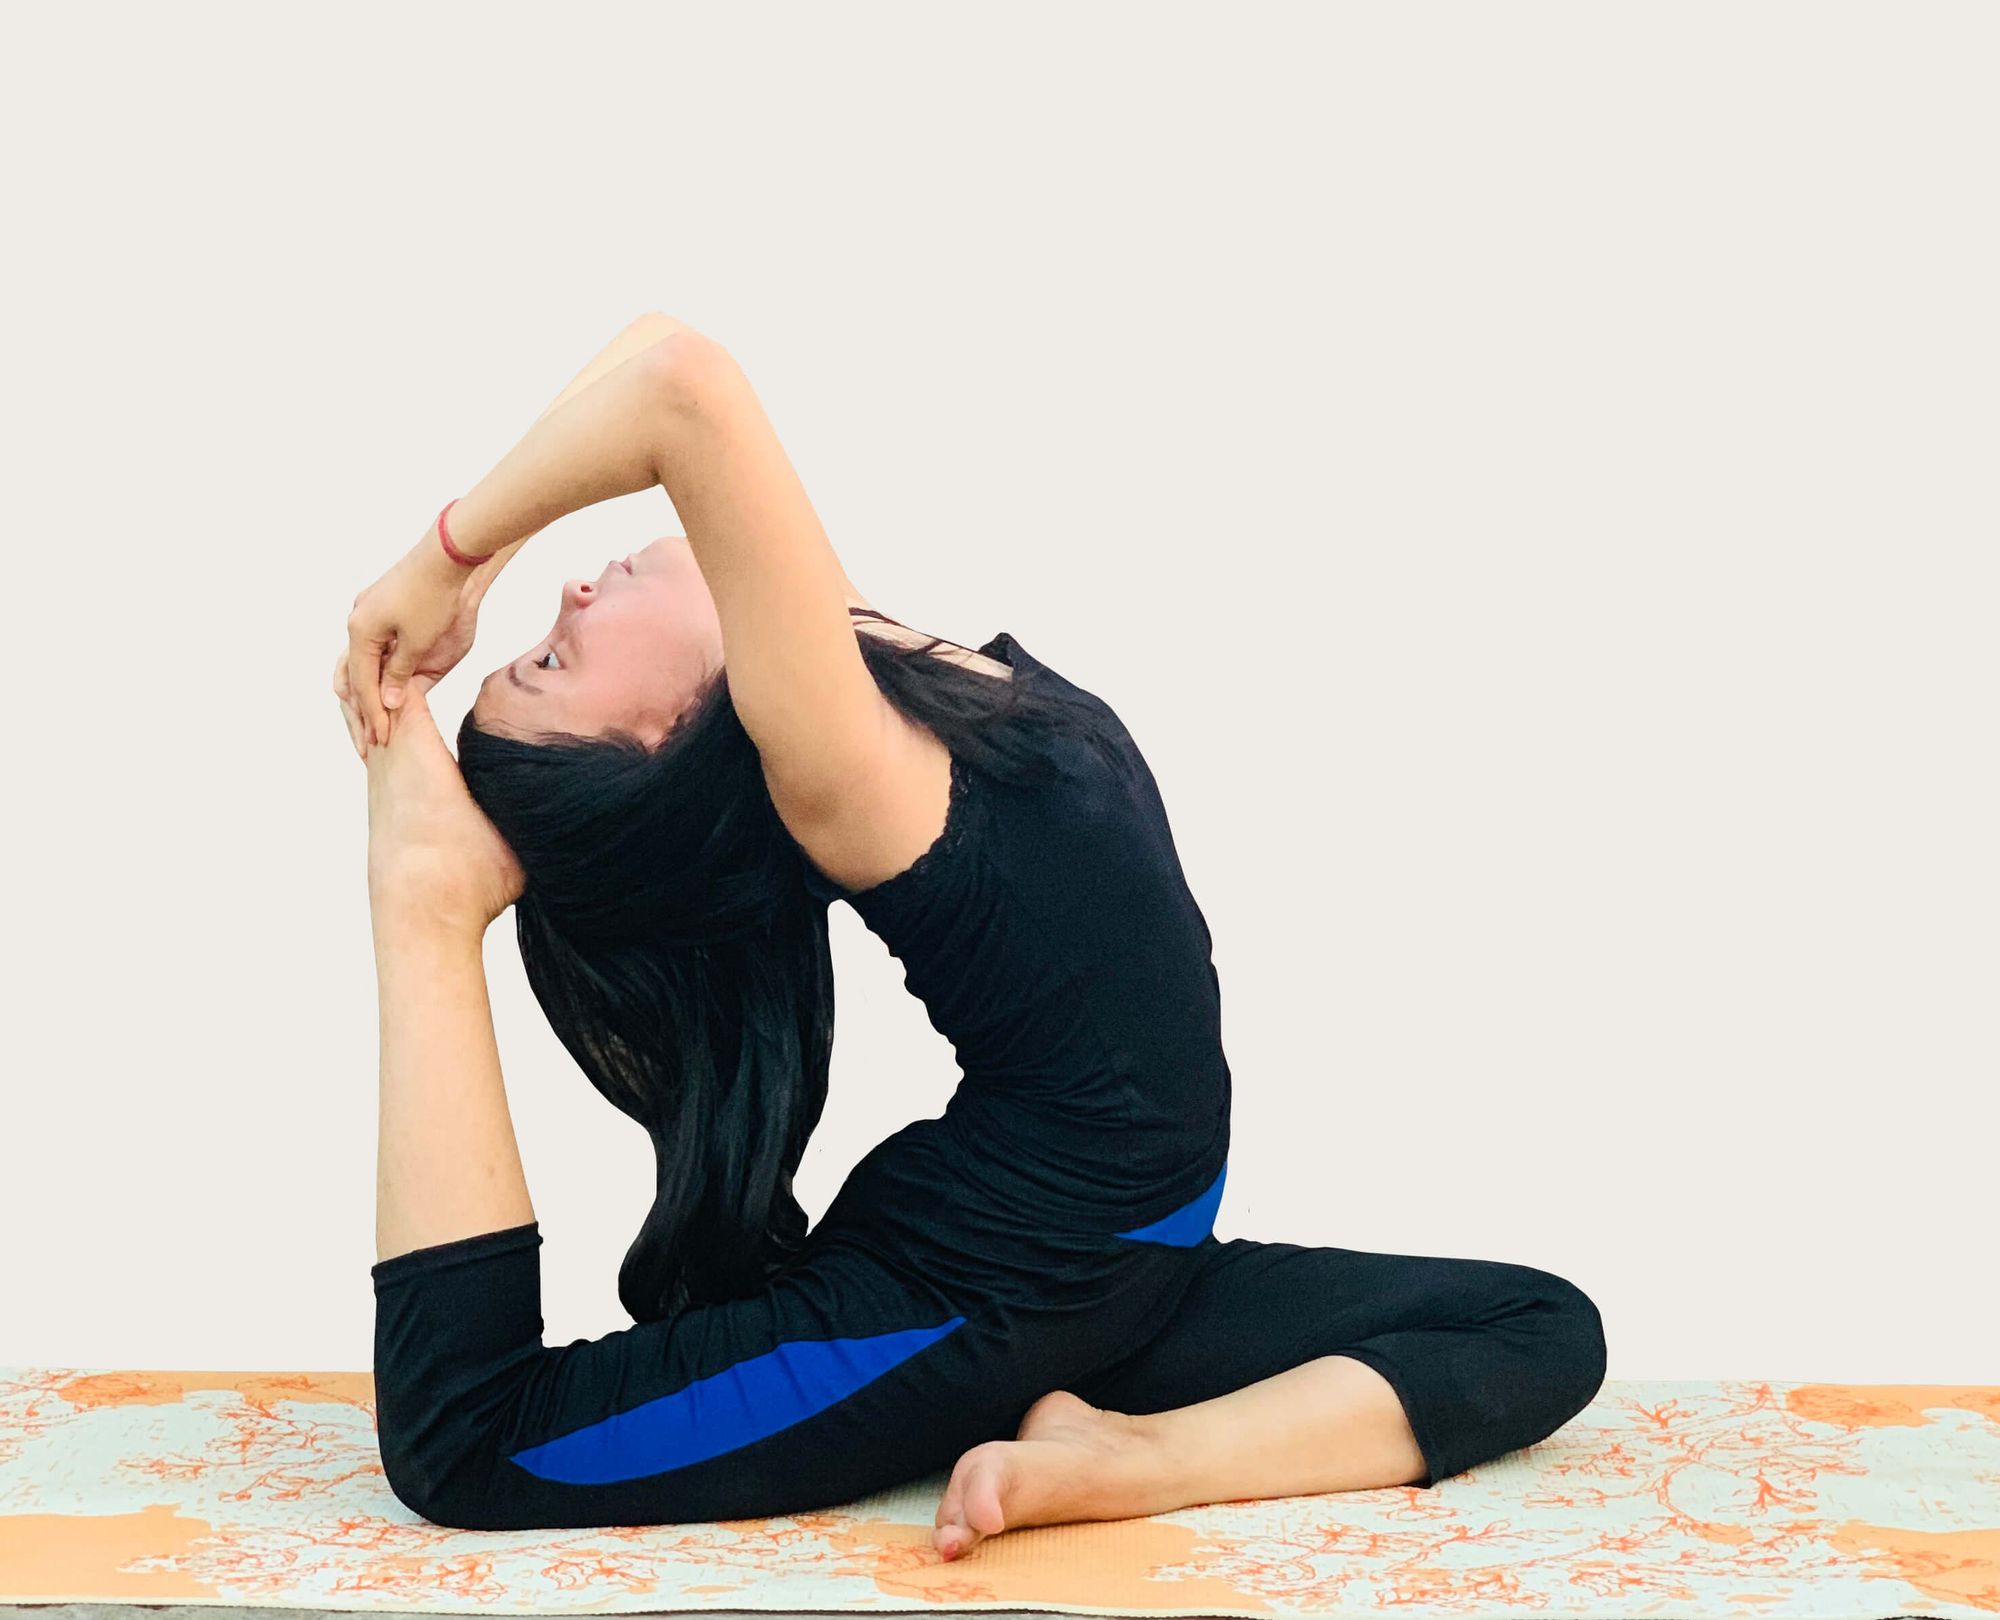 Top 10 Best Restorative Yoga Poses That Even Your Grandmother Could Do